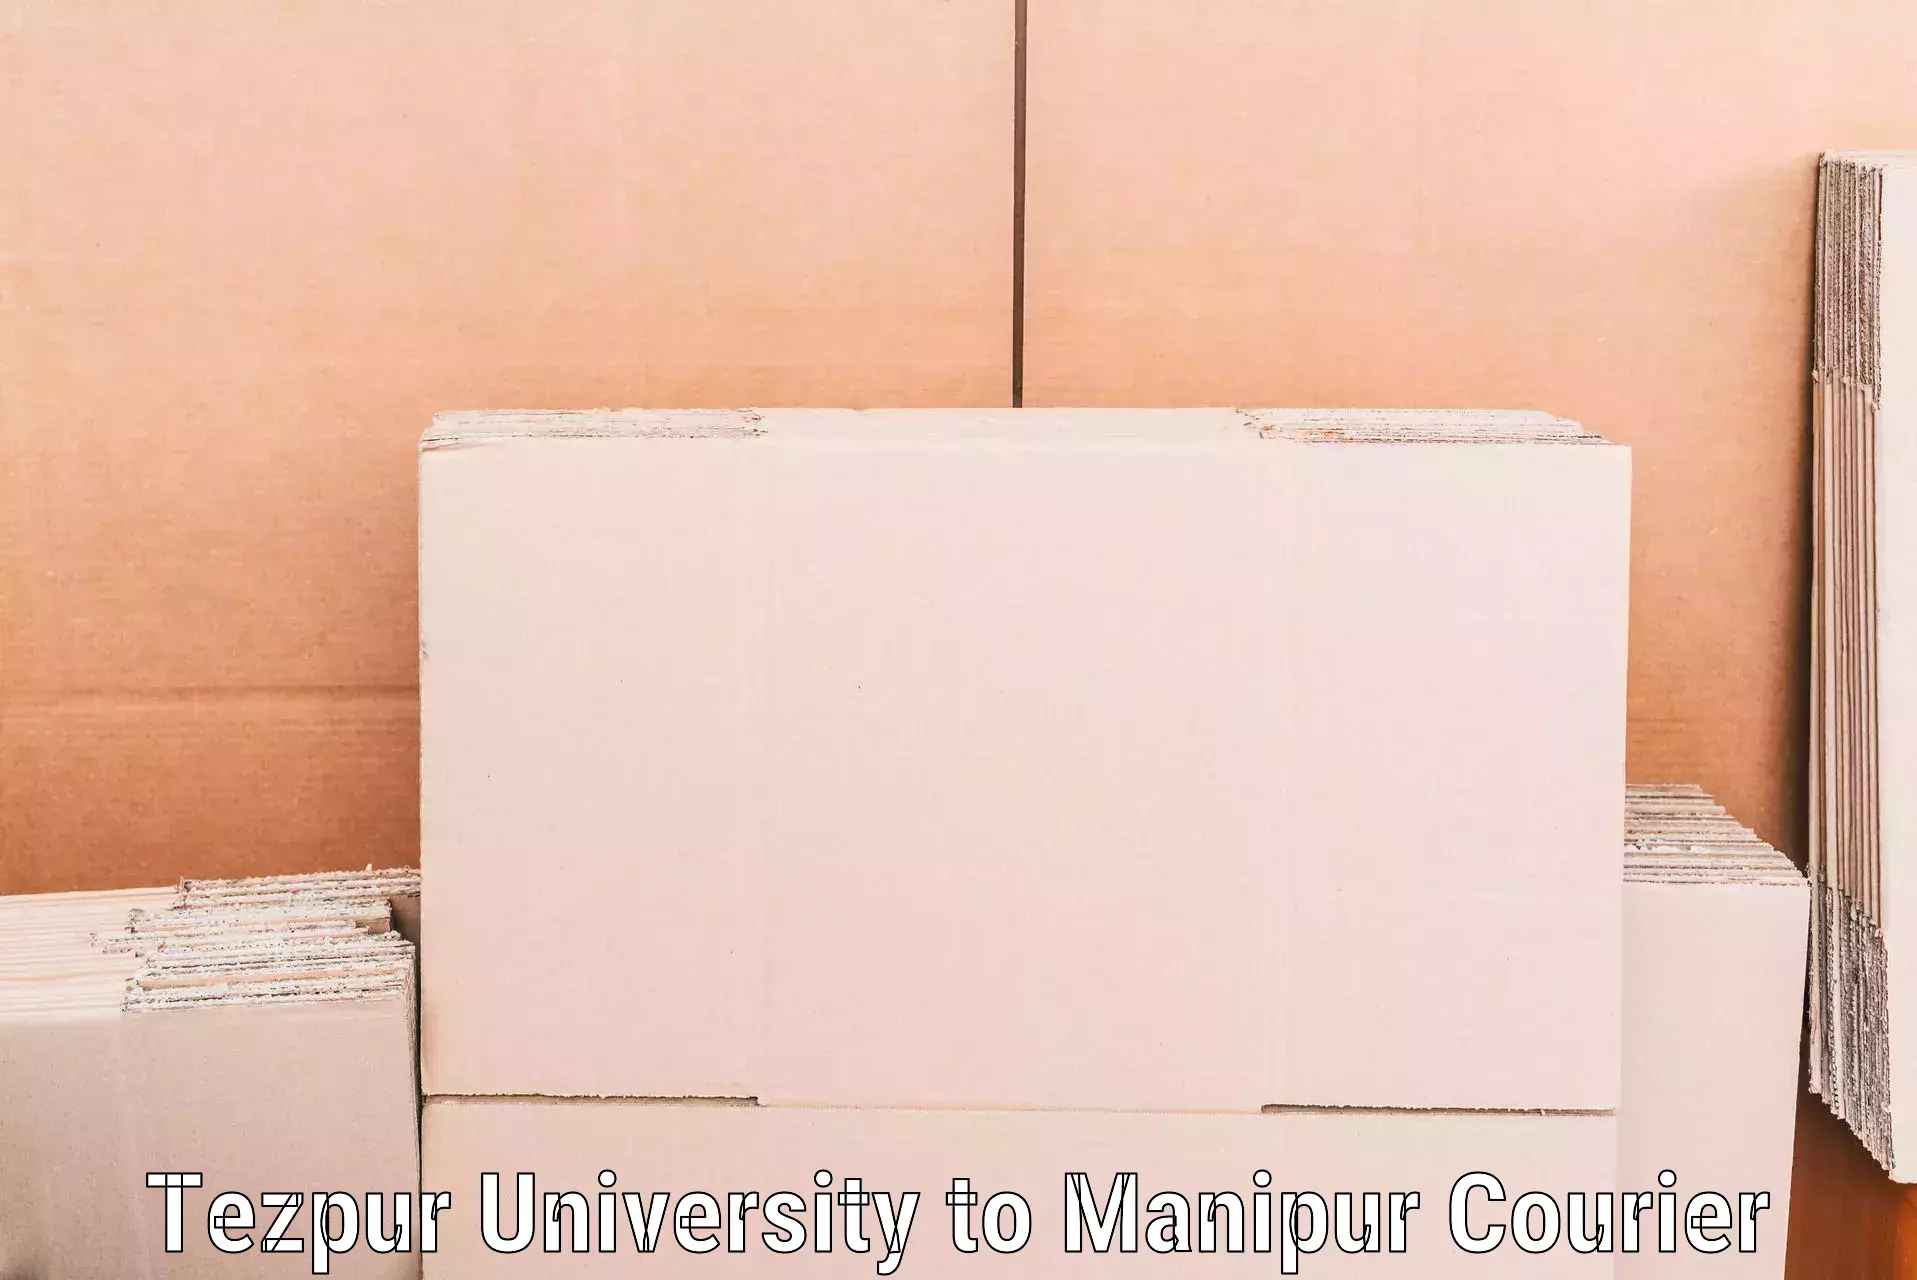 Professional furniture movers Tezpur University to Imphal